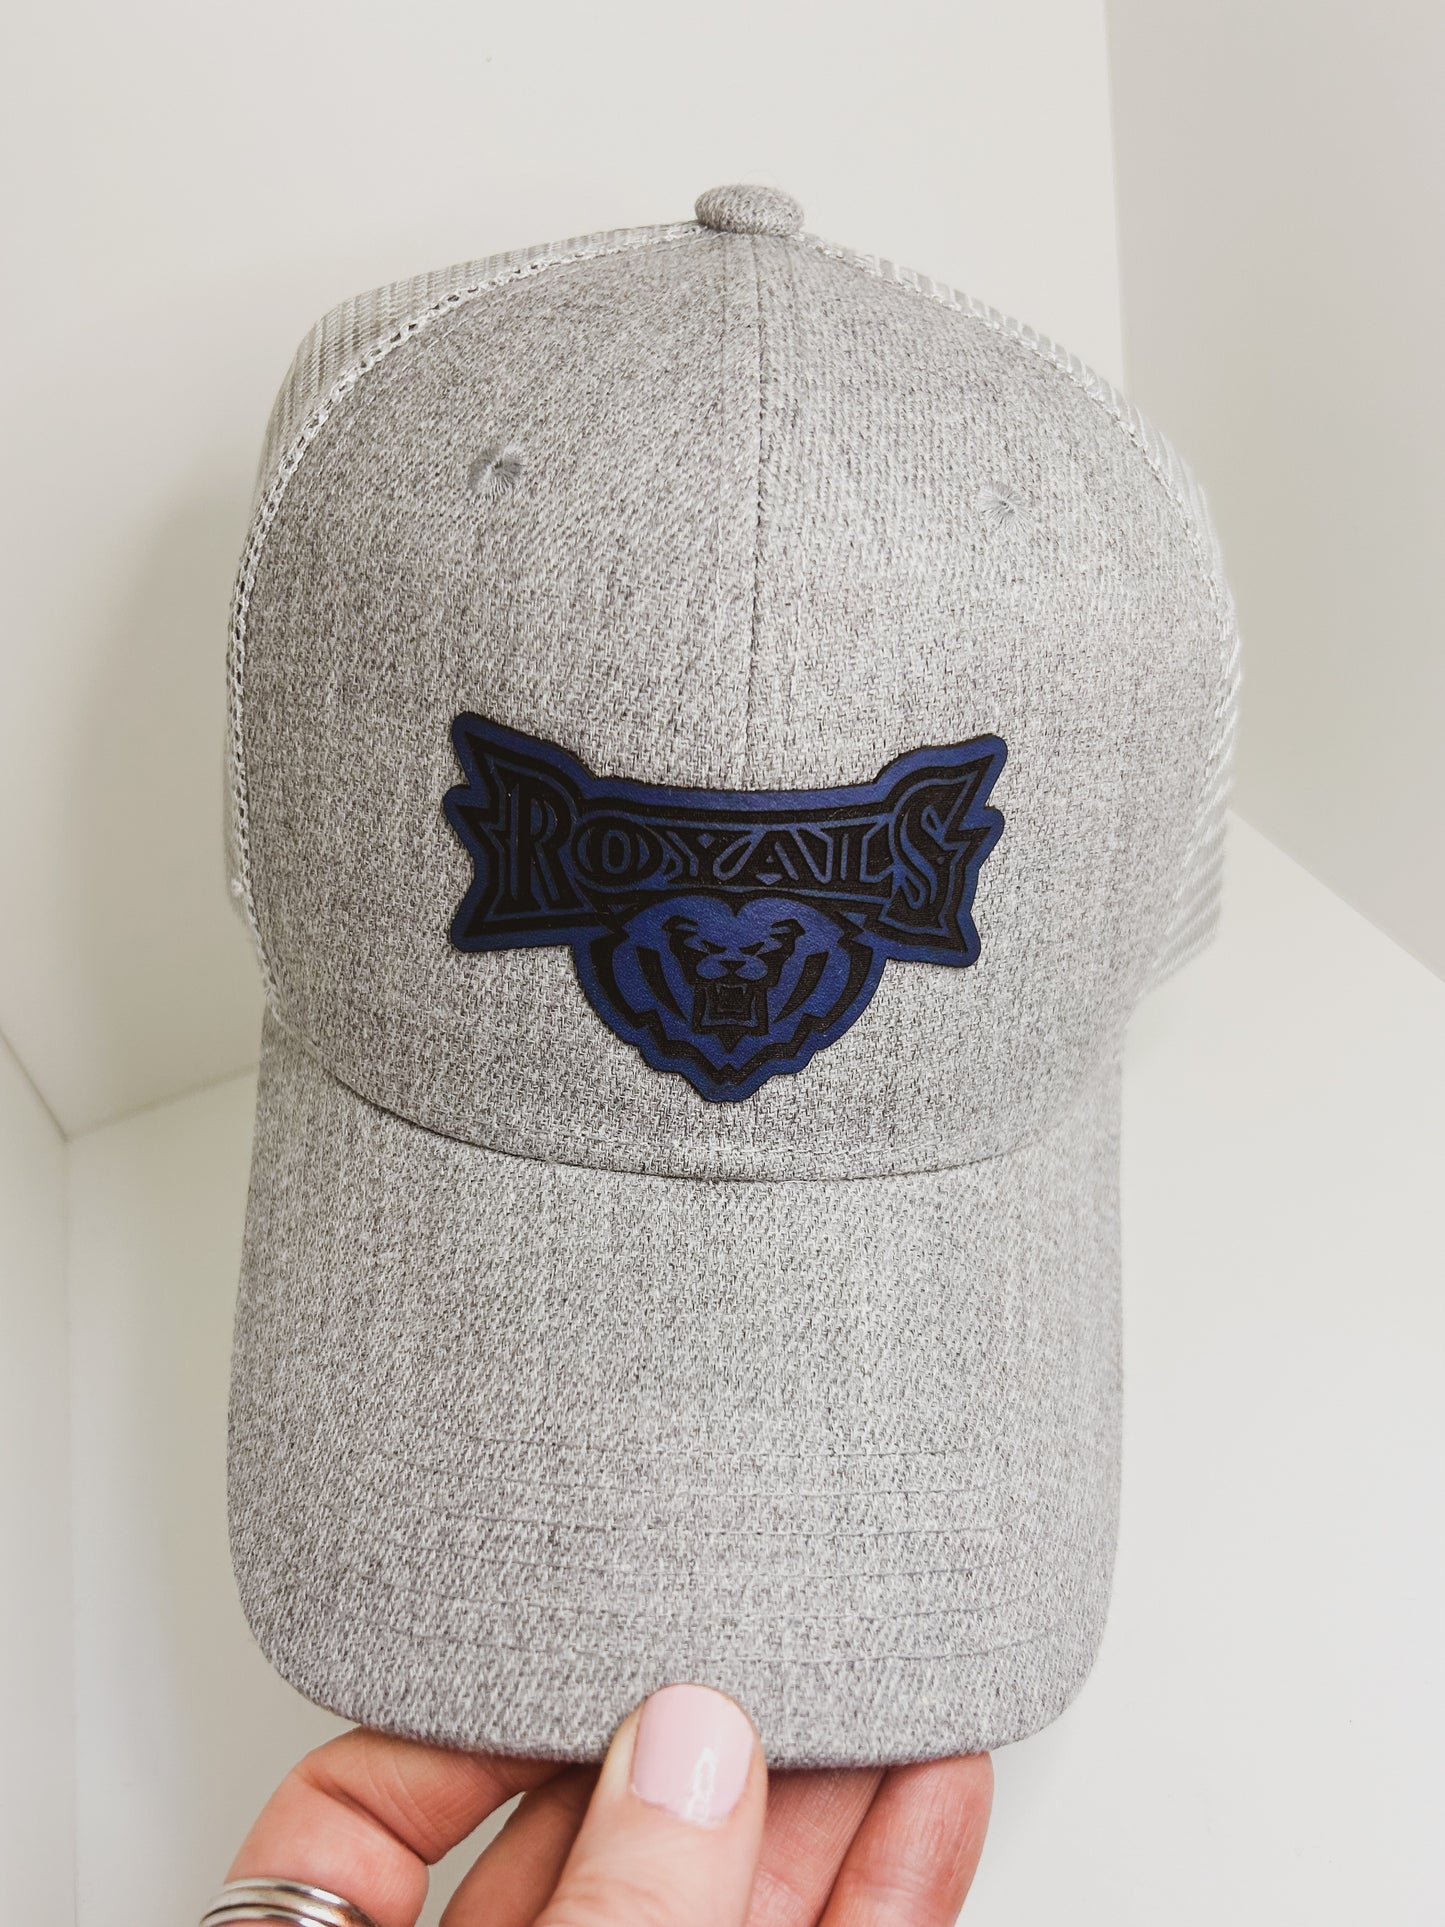 HSE Royals - Heather Gray Baseball Hat - Royals Patch